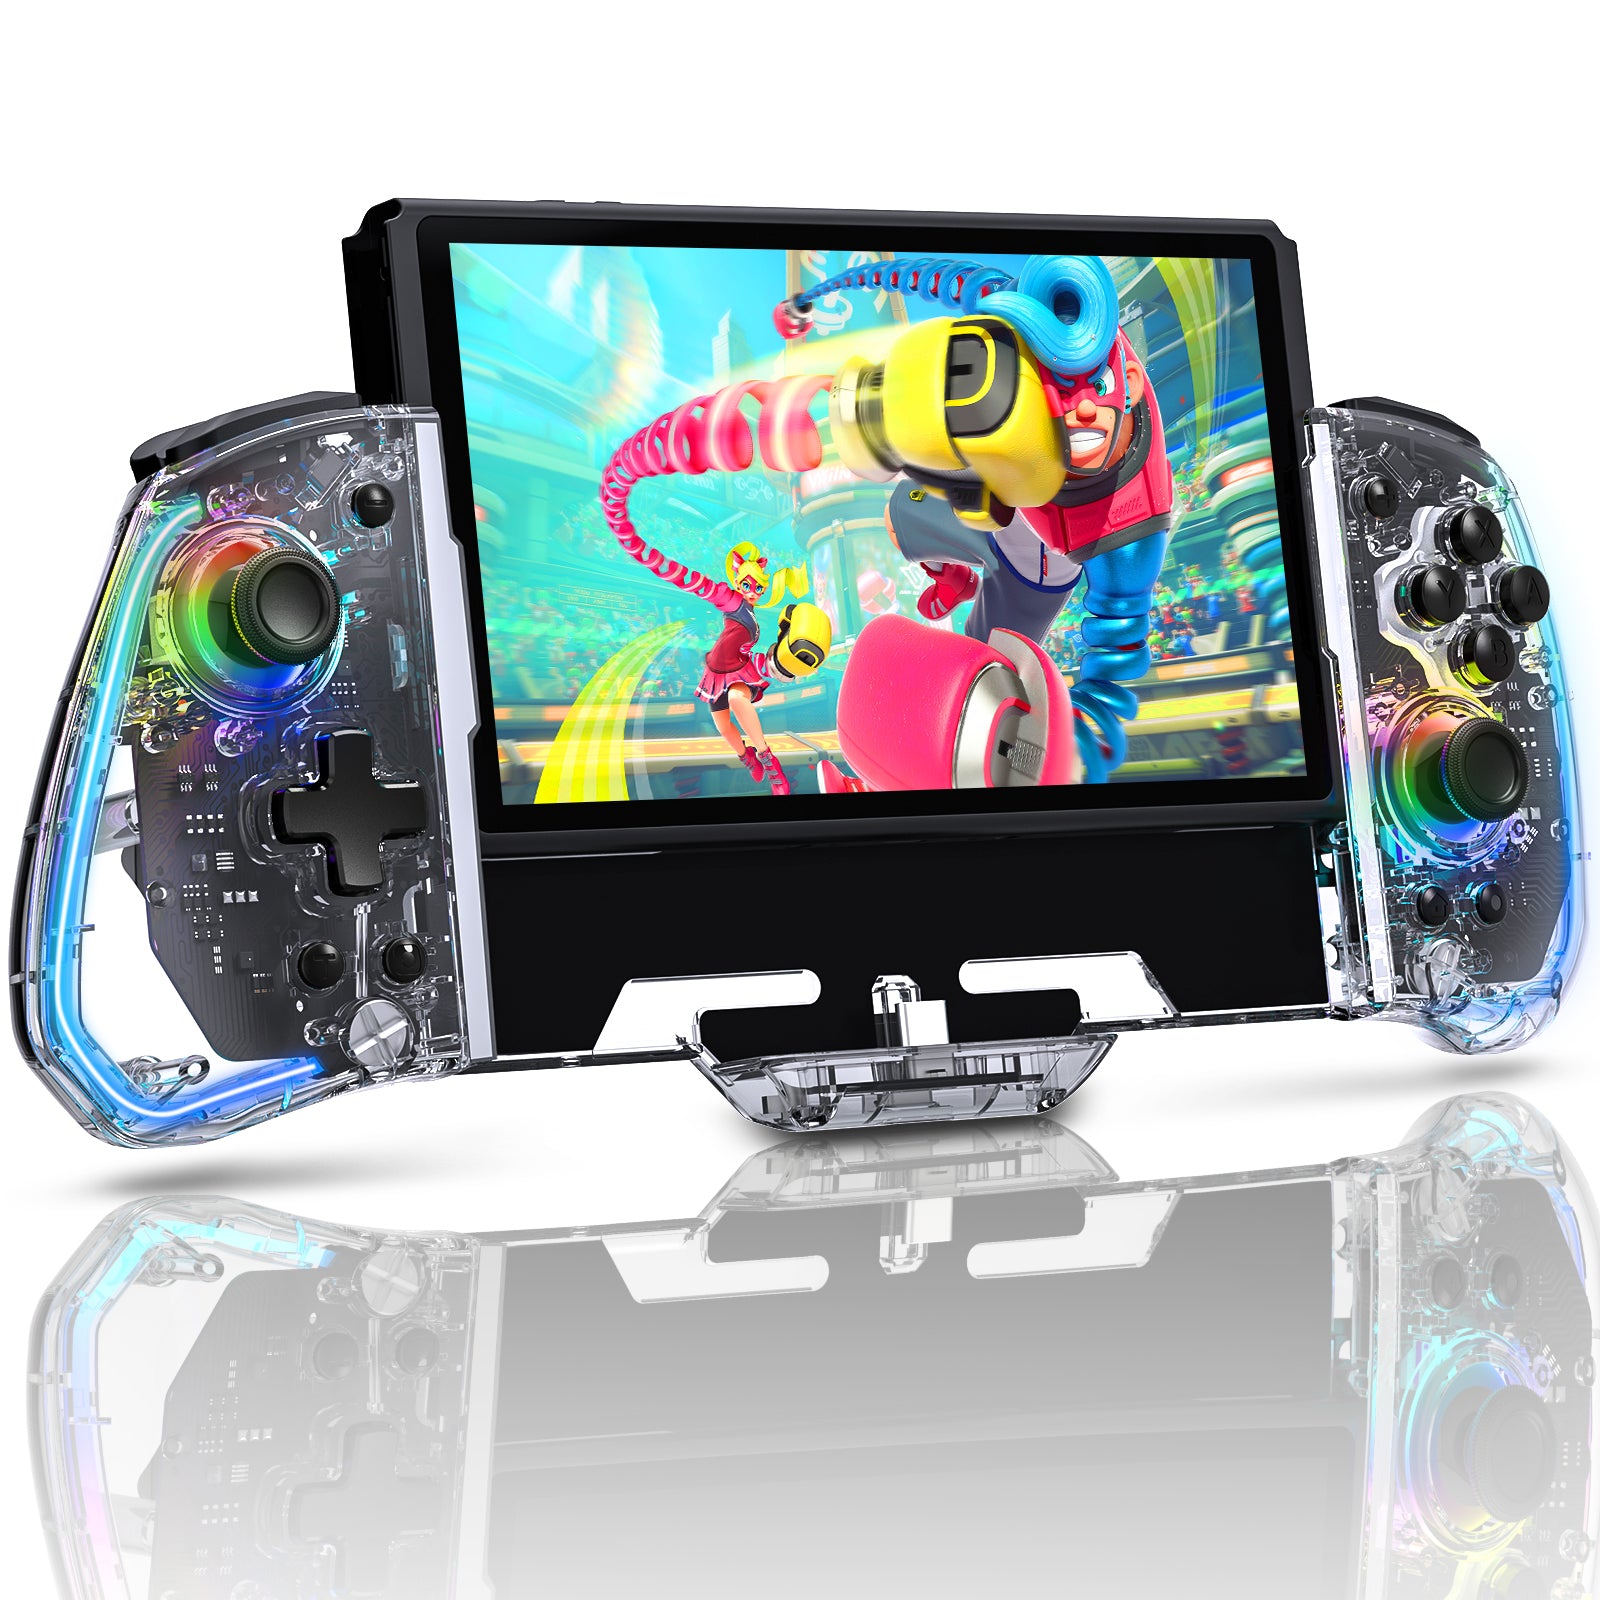 The image showcases the transparent skin and RGB lighting effects of the Bluetooth controller